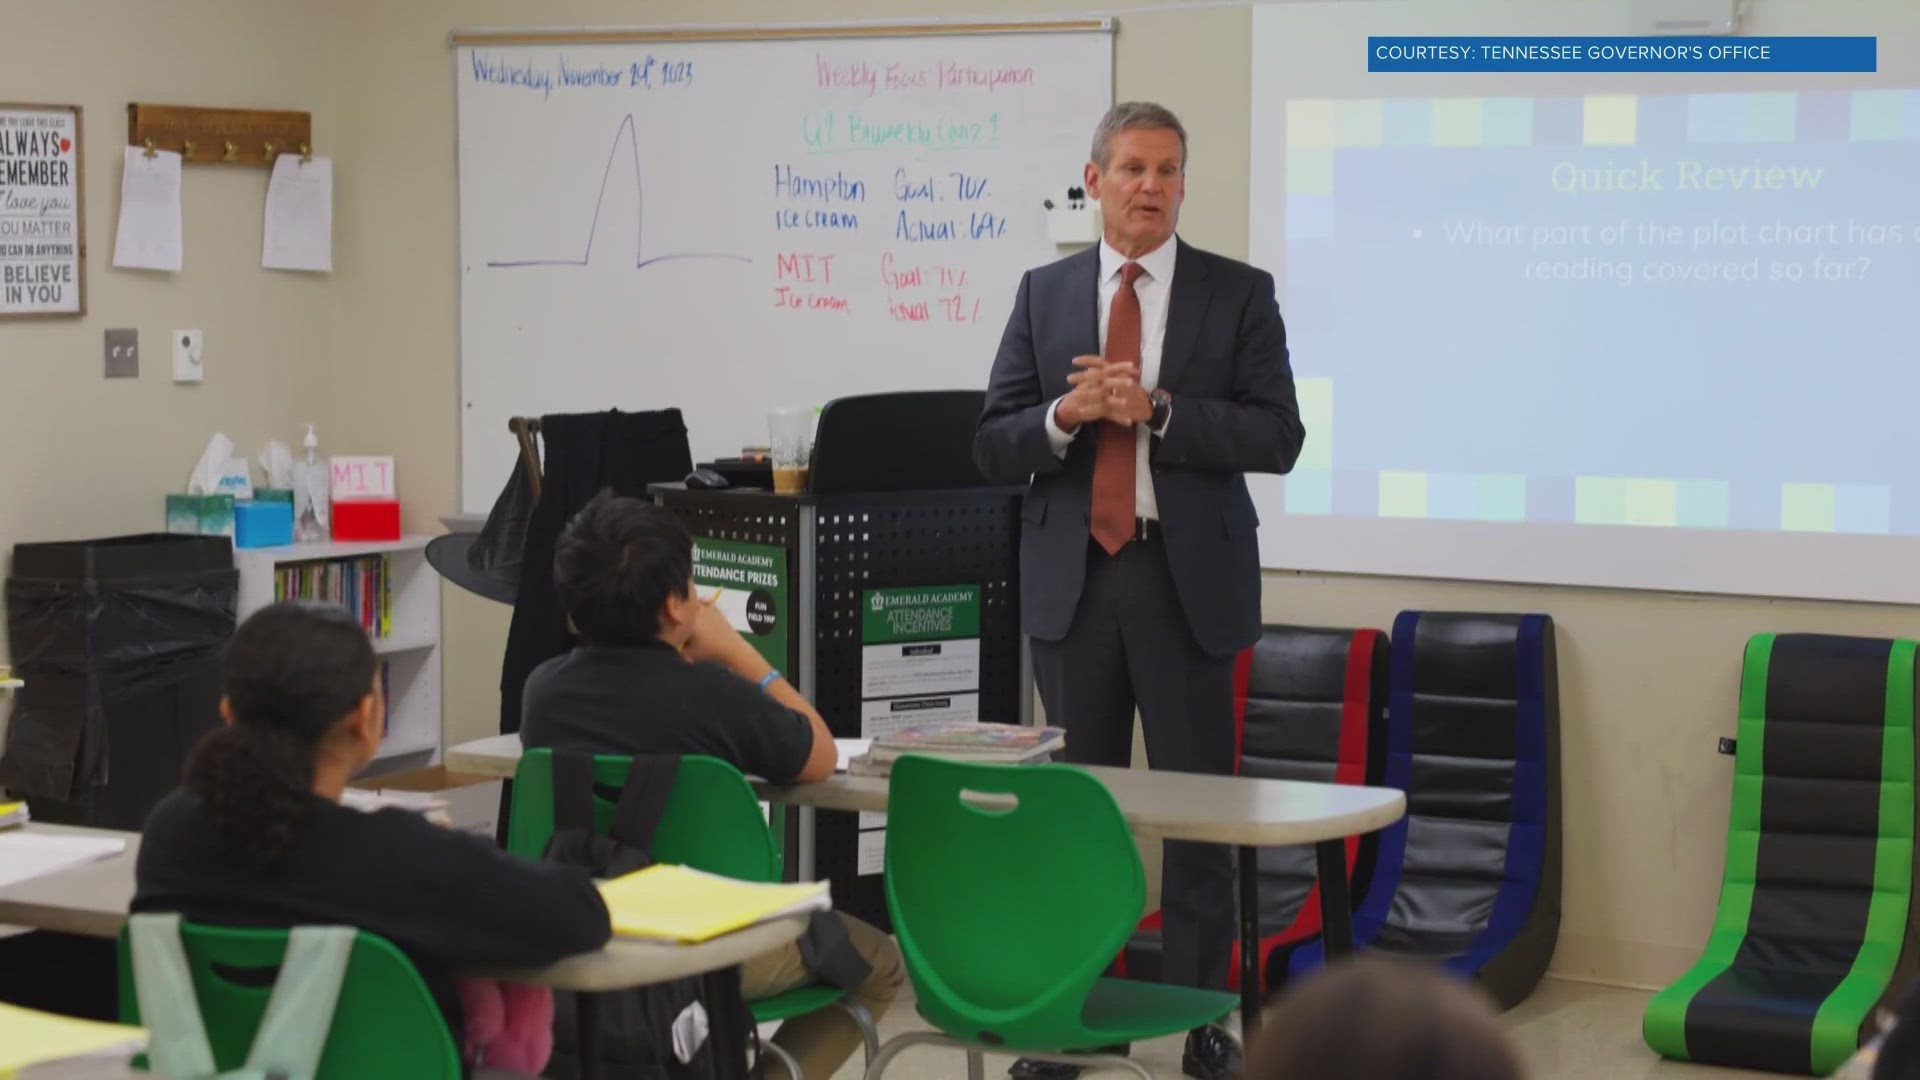 Gov. Bill Lee visited Emerald Academy on Wednesday and spoke about his proposal to let families spend public money on tuition and expenses for non-public schools.